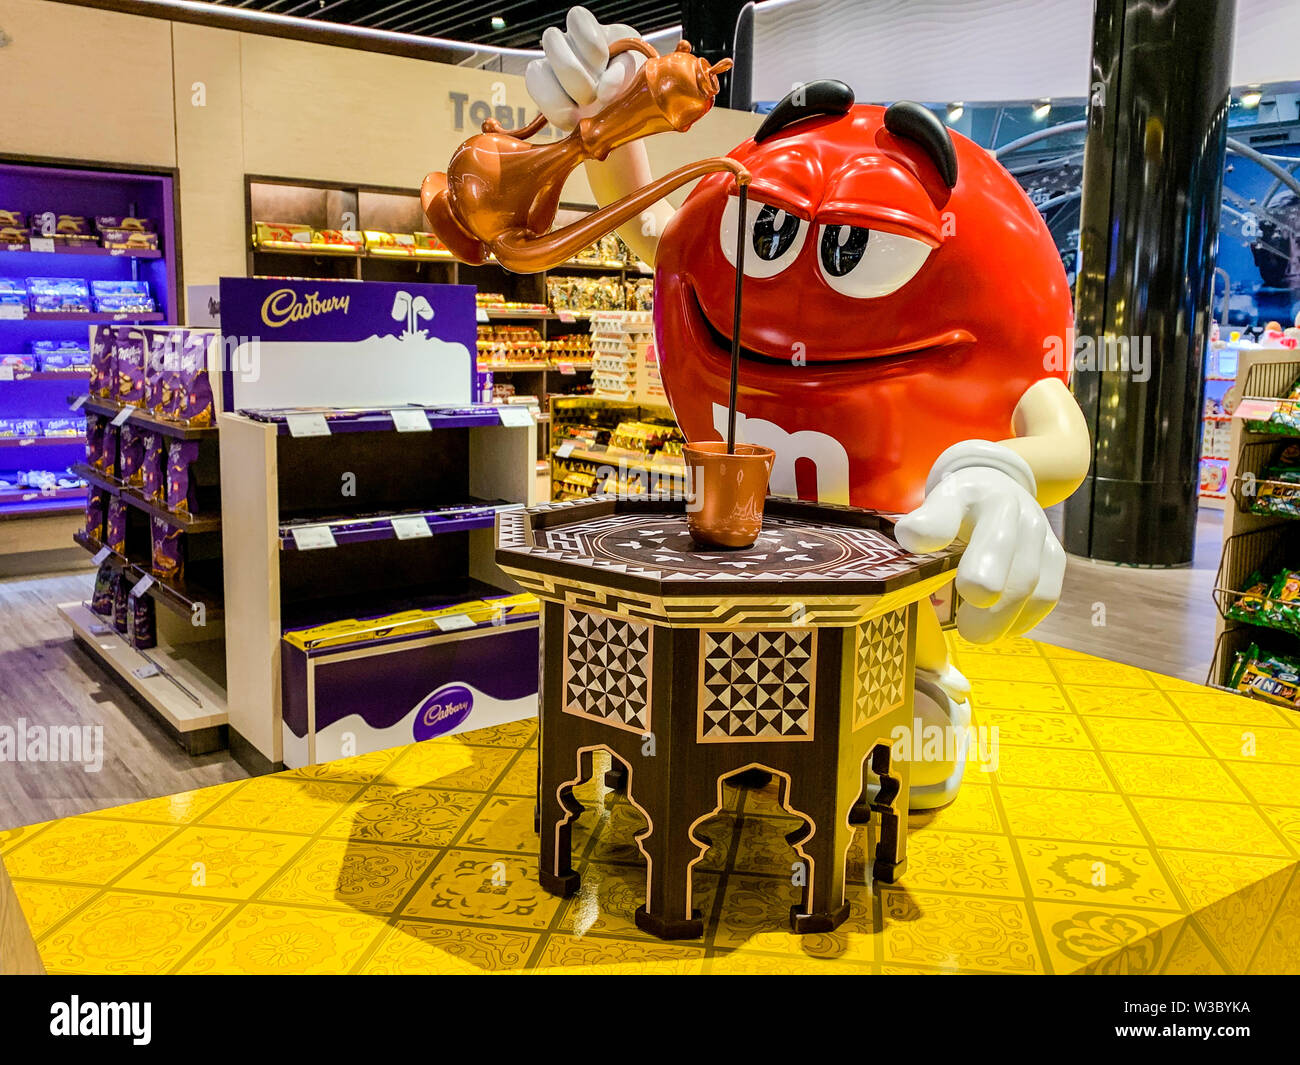 M&M mascot figure pouring Turkish coffee in a mug. Adaption of candy advertising of the company MARS for different regions and countries. Istanbul, Tu Stock Photo